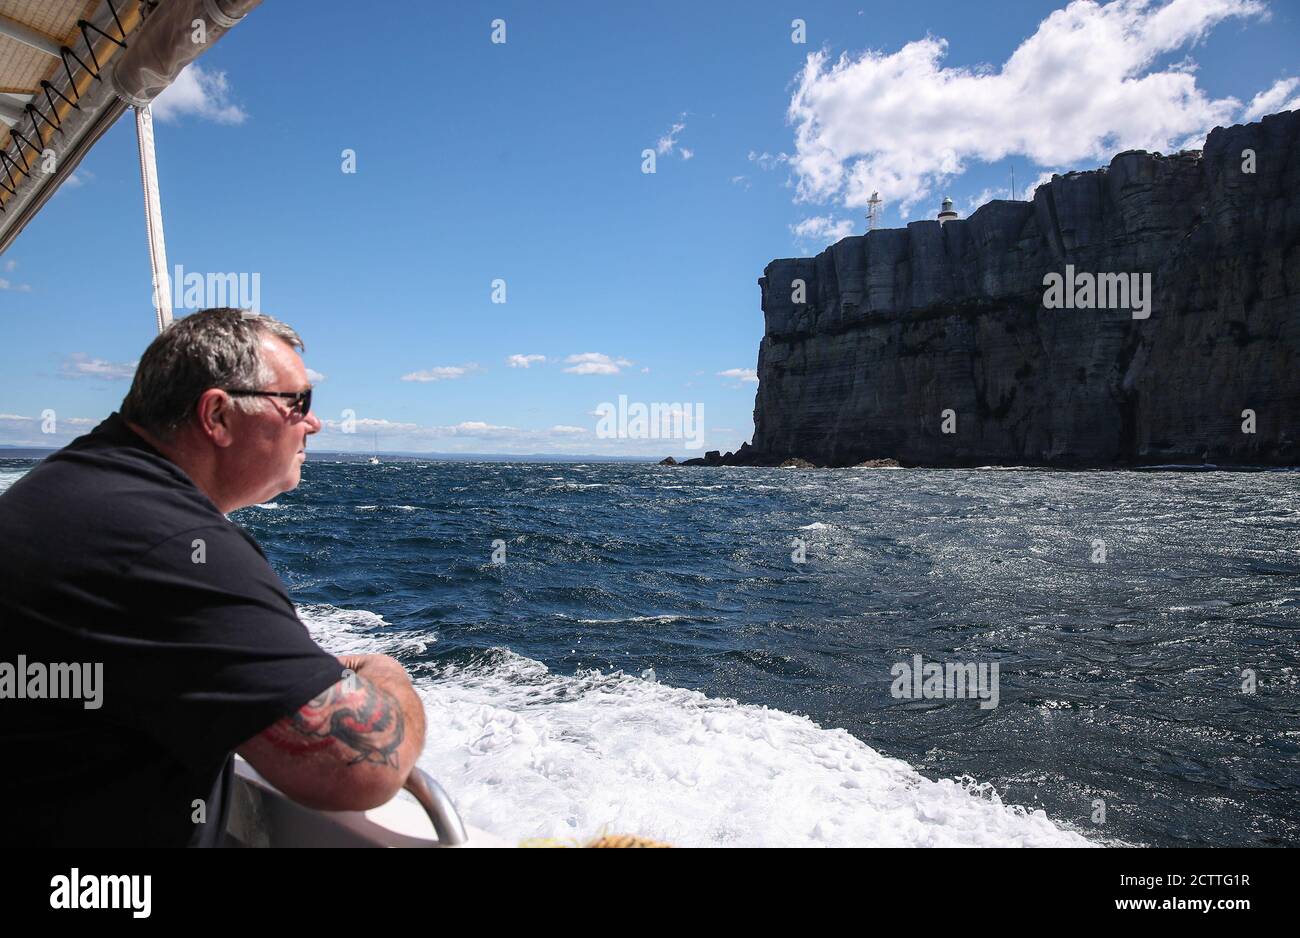 Sydney, Australia. 23rd Sep, 2020. A tourist enjoys cruising in Jervis Bay, south of Sydney, Australia, Sept. 23, 2020. TO GO WITH 'Feature: Trouble in Australia's humpback whale paradise as tourists dry up' Credit: Bai Xuefei/Xinhua/Alamy Live News Stock Photo